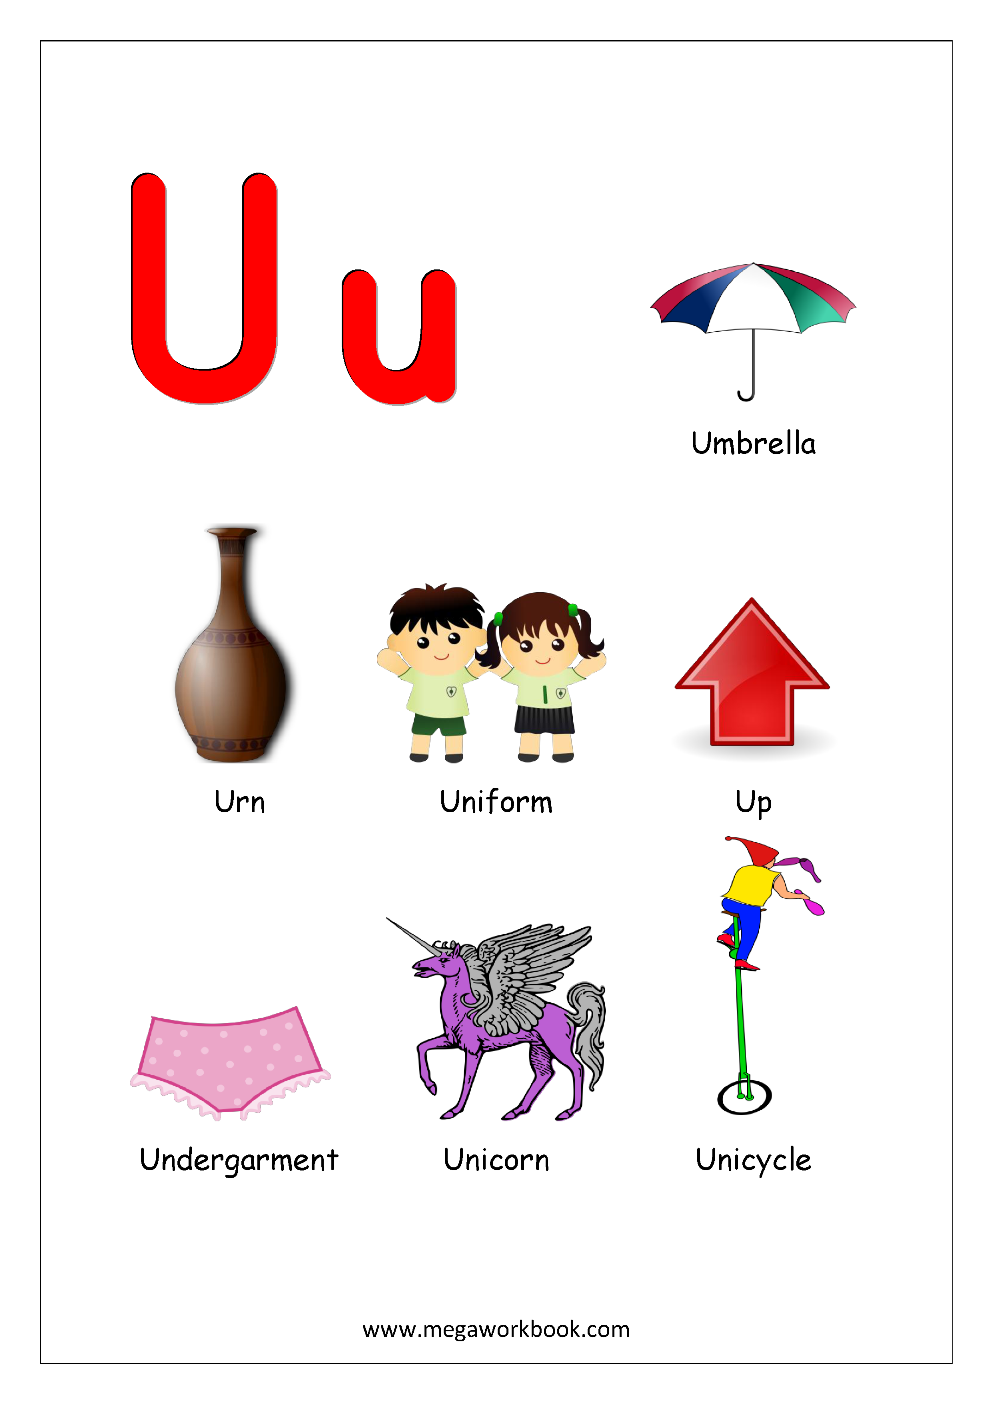 objects that start with u